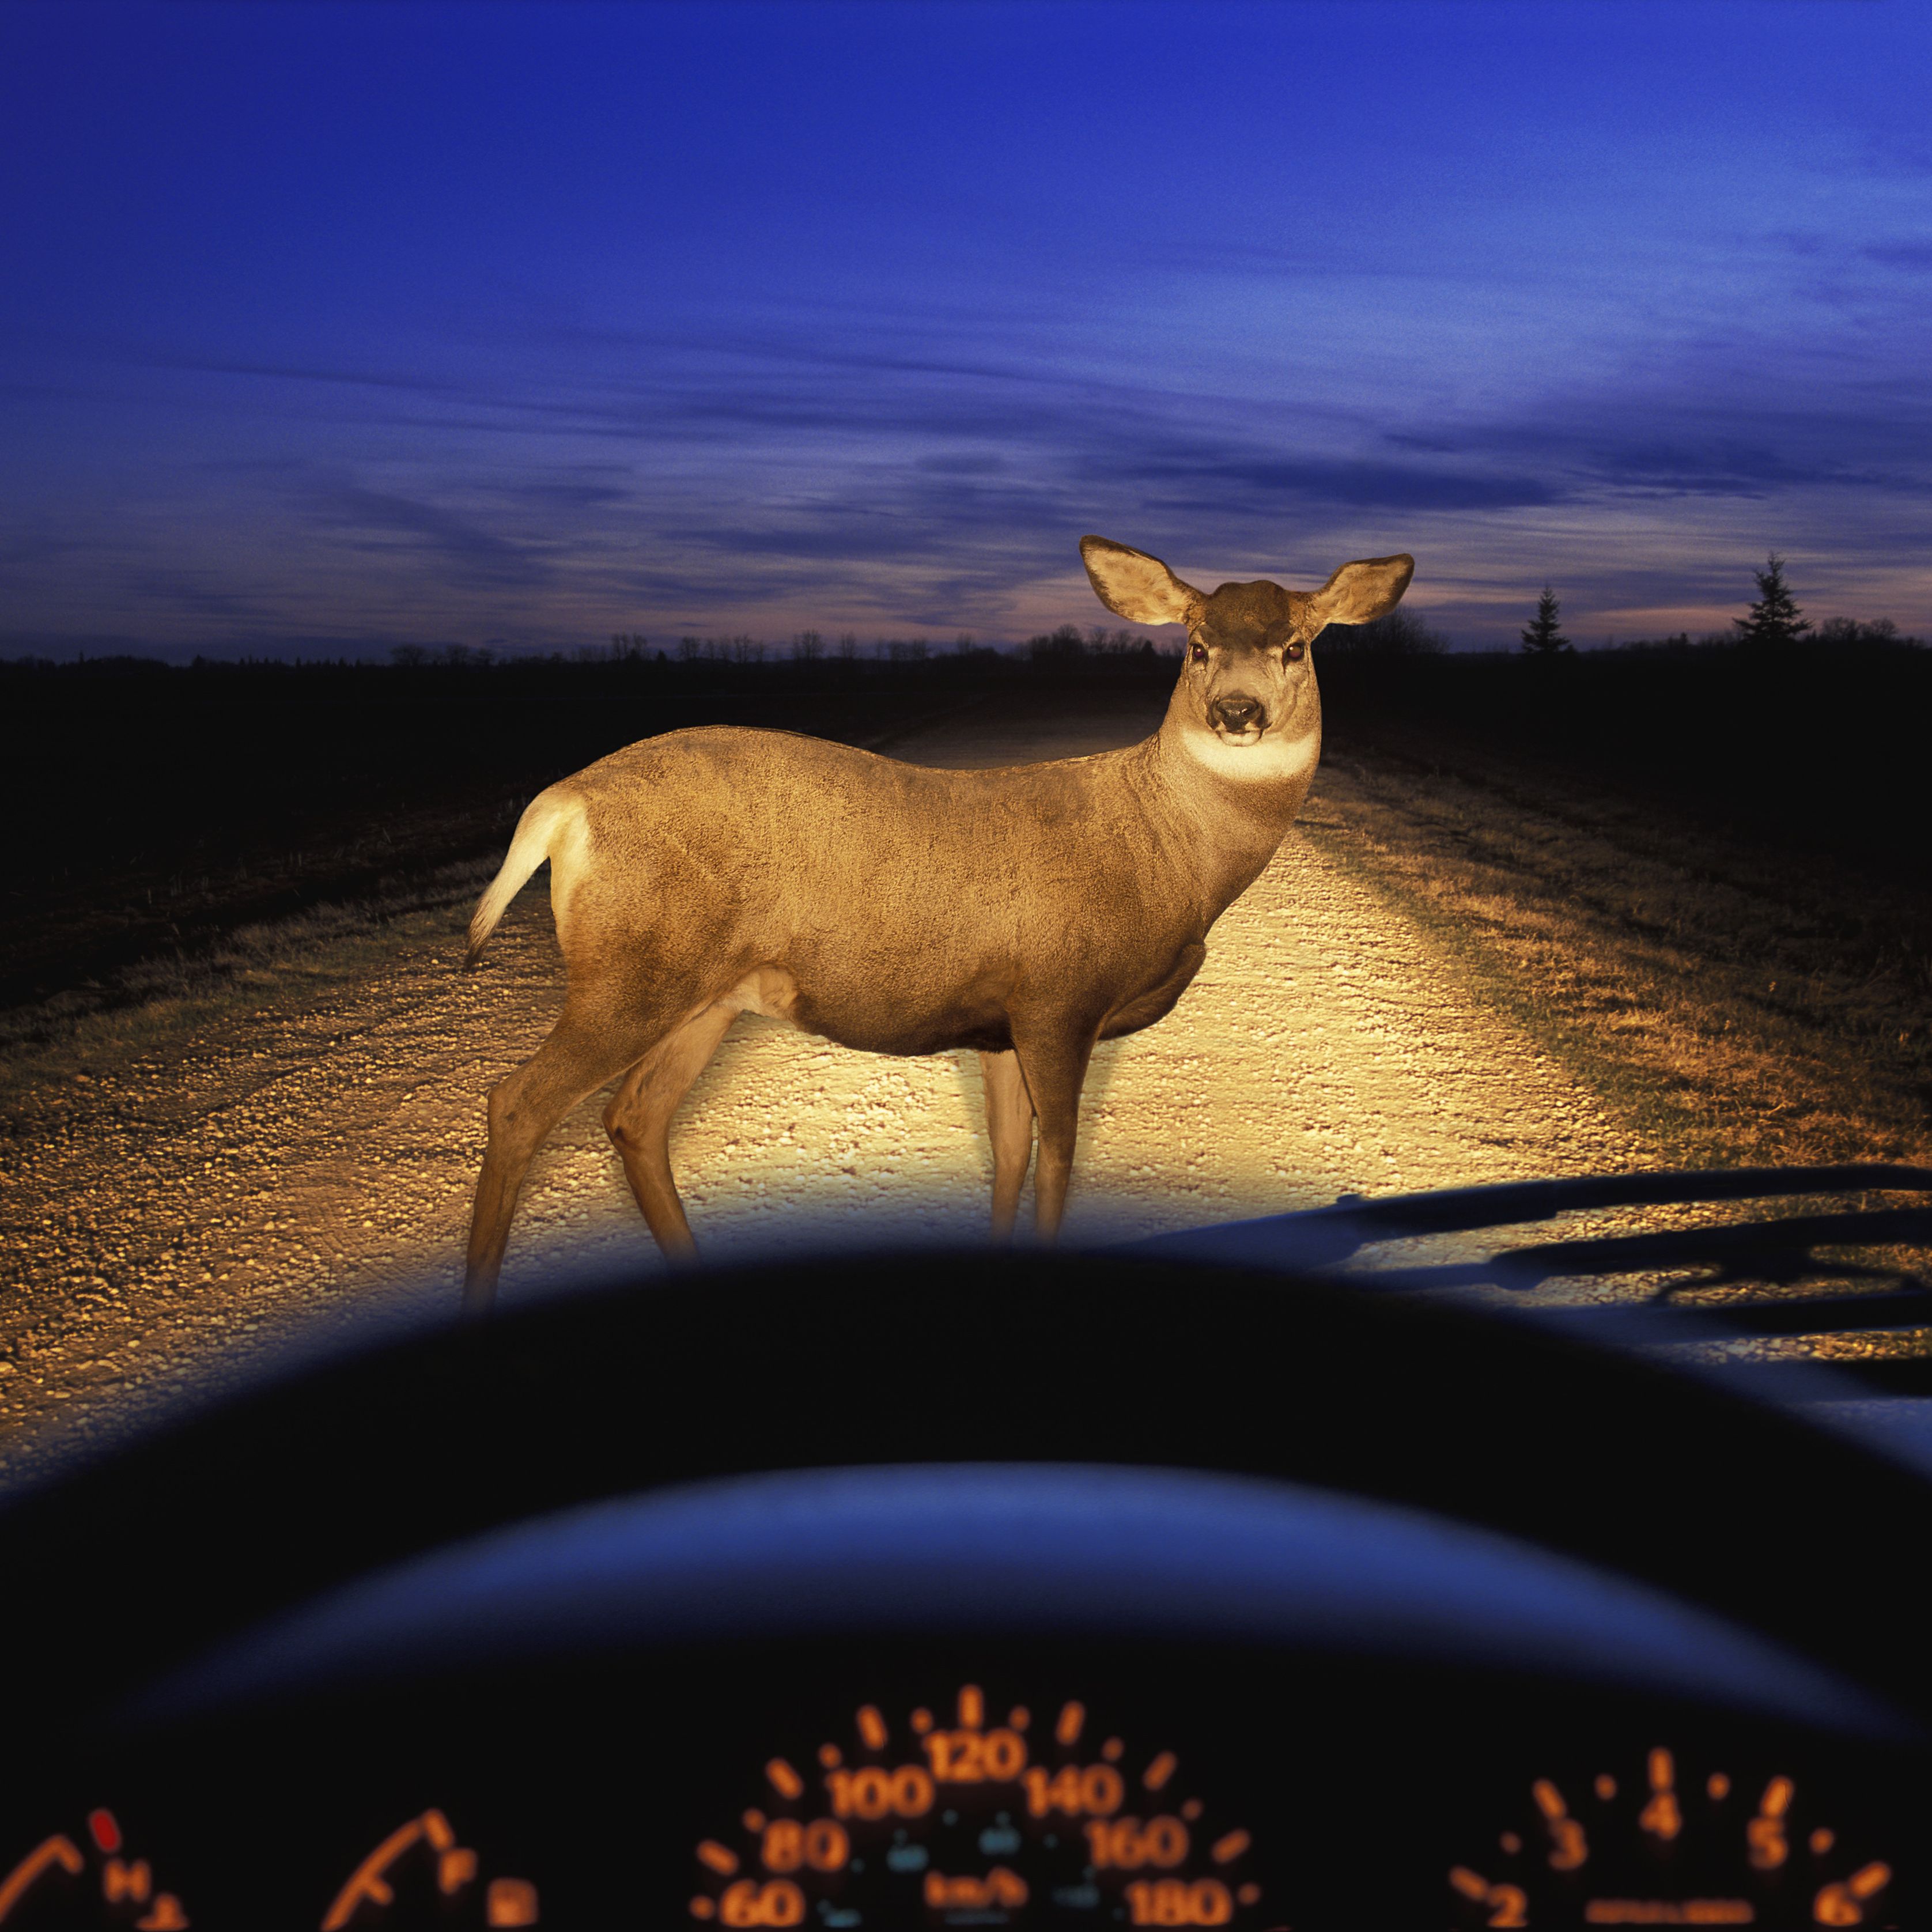 This Tech Will Help Us Avoid Hitting the 1.5 Million Deer on the Road Each Year